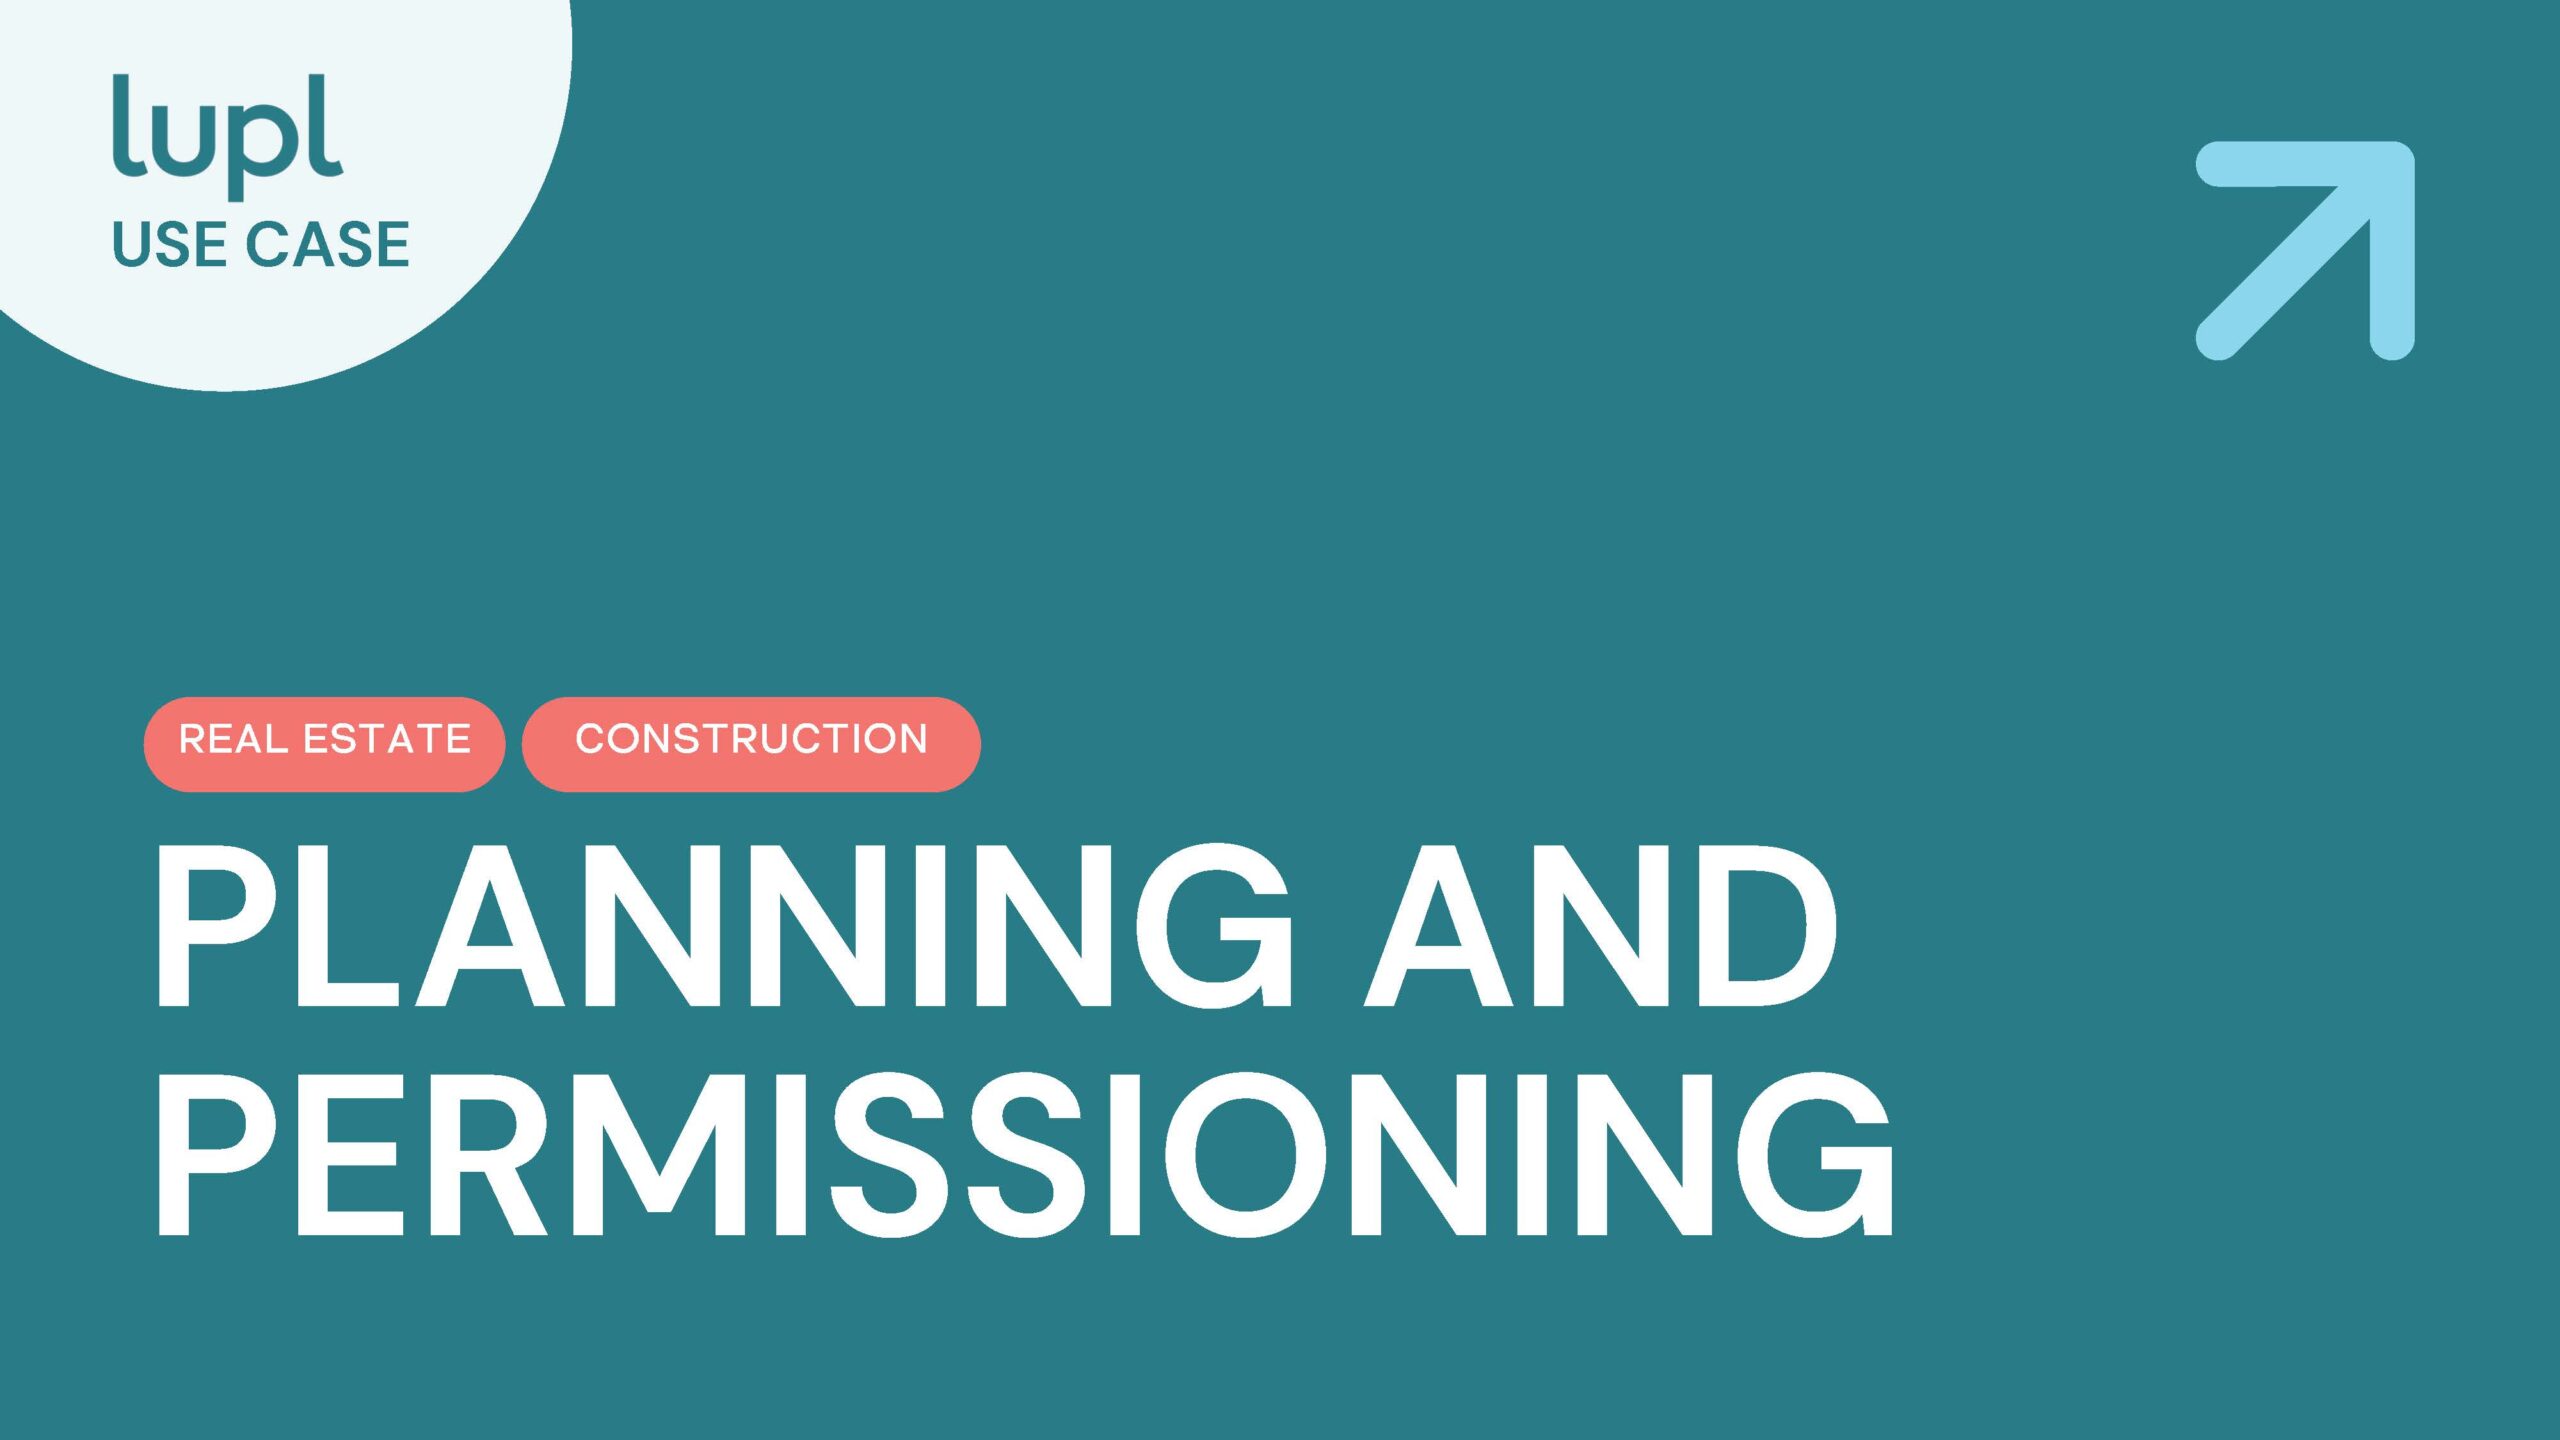 USE CASE - Planning and permissioning_Page_1